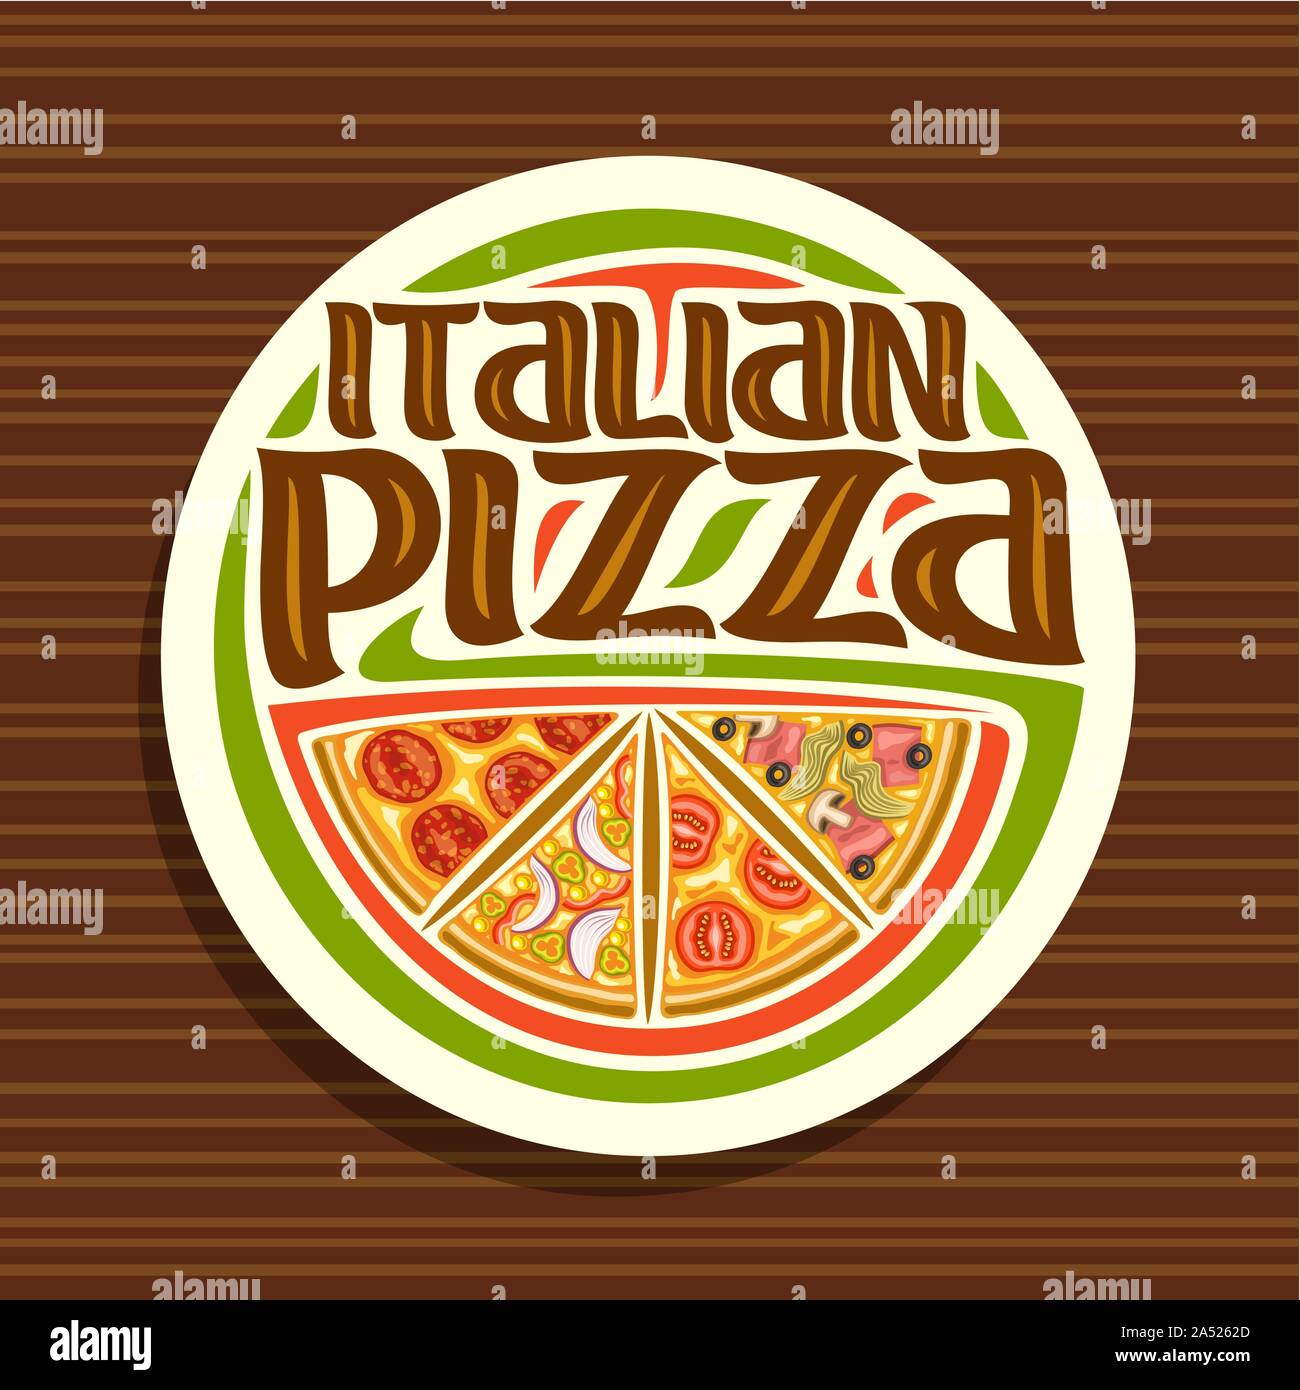 Vector logo for Italian Pizza, white round sign for pizzeria with 4 sliced pieces different kinds of pizza top view, original typeface for words itali Stock Vector